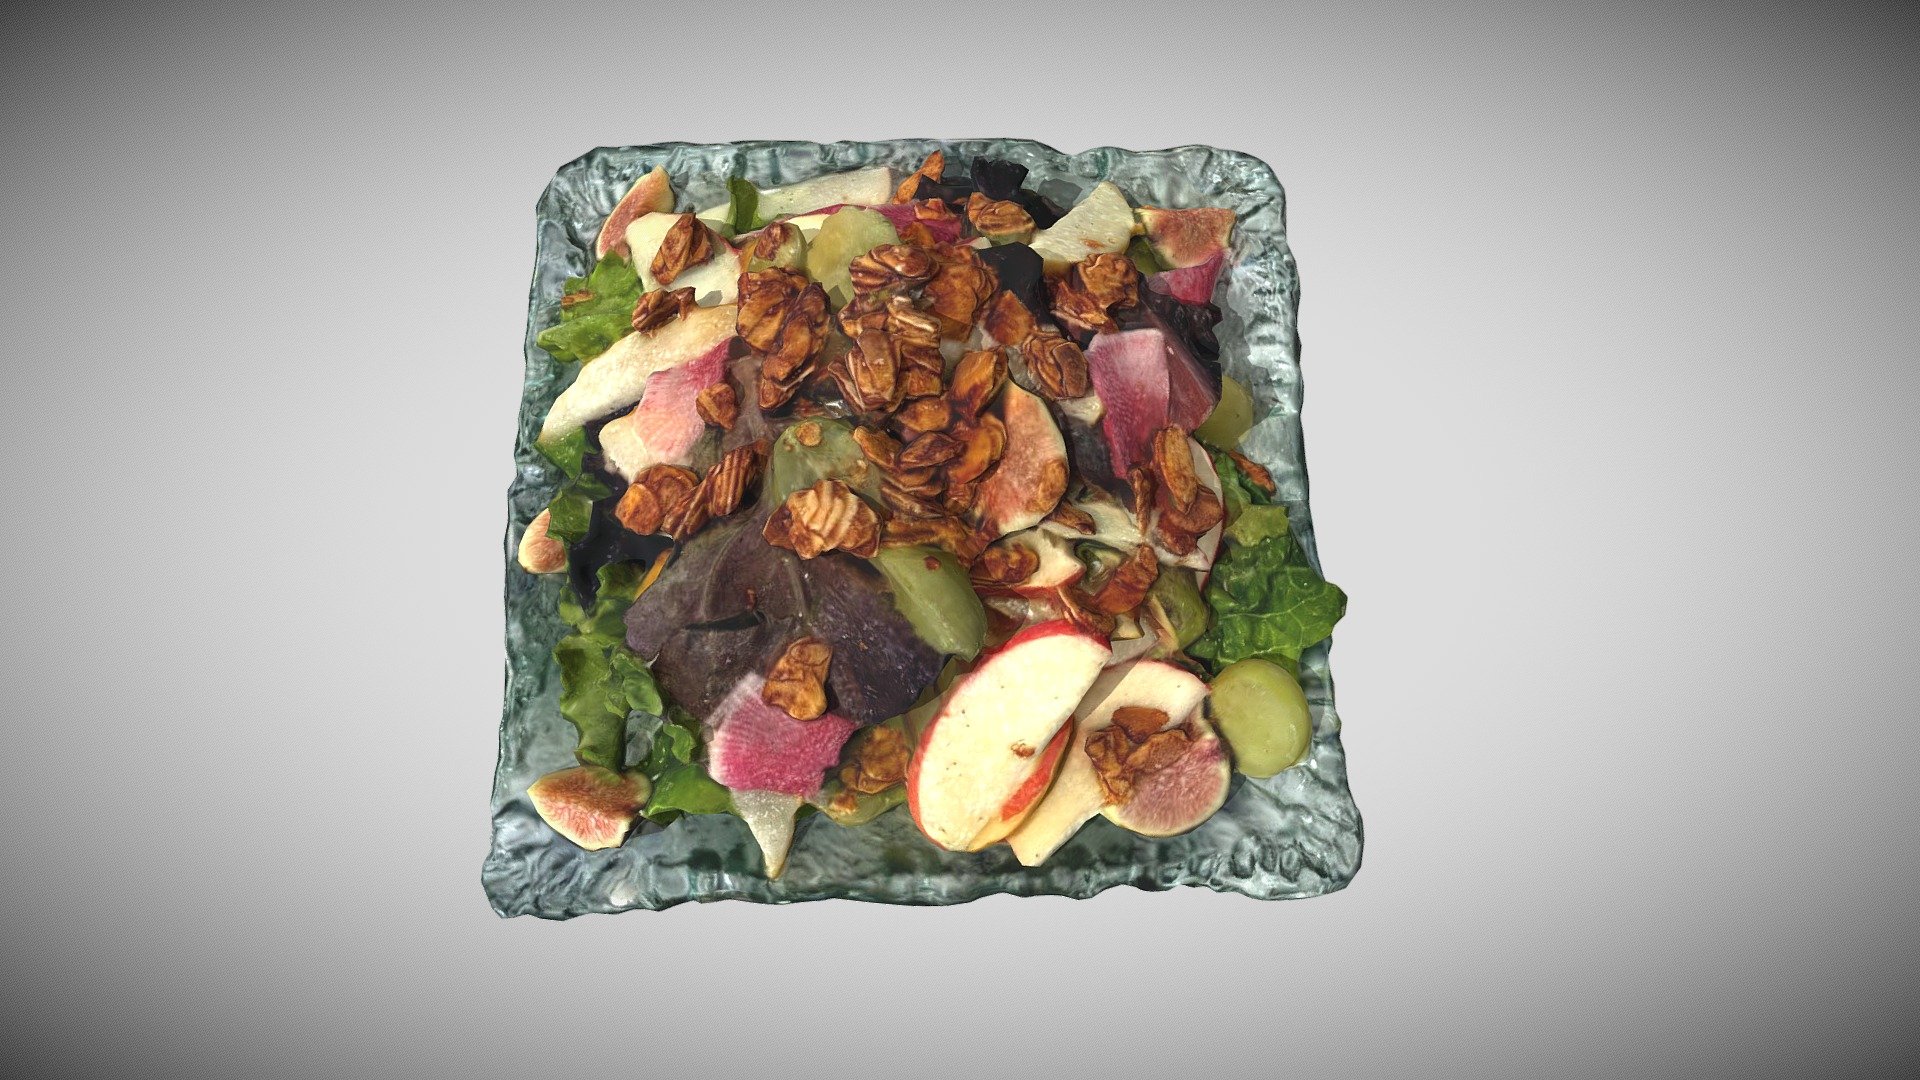 Star Route Farms mixed baby lettuces | Pink Lady apples |  Asian pear | grapes | figs | watermelon radish | 
sugar-spiced almonds | citrus-cumin vinaigrette - Copita Ensalada Mixta - Buy Royalty Free 3D model by Augmented Reality Marketing Solutions LLC (@AugRealMarketing) 3d model